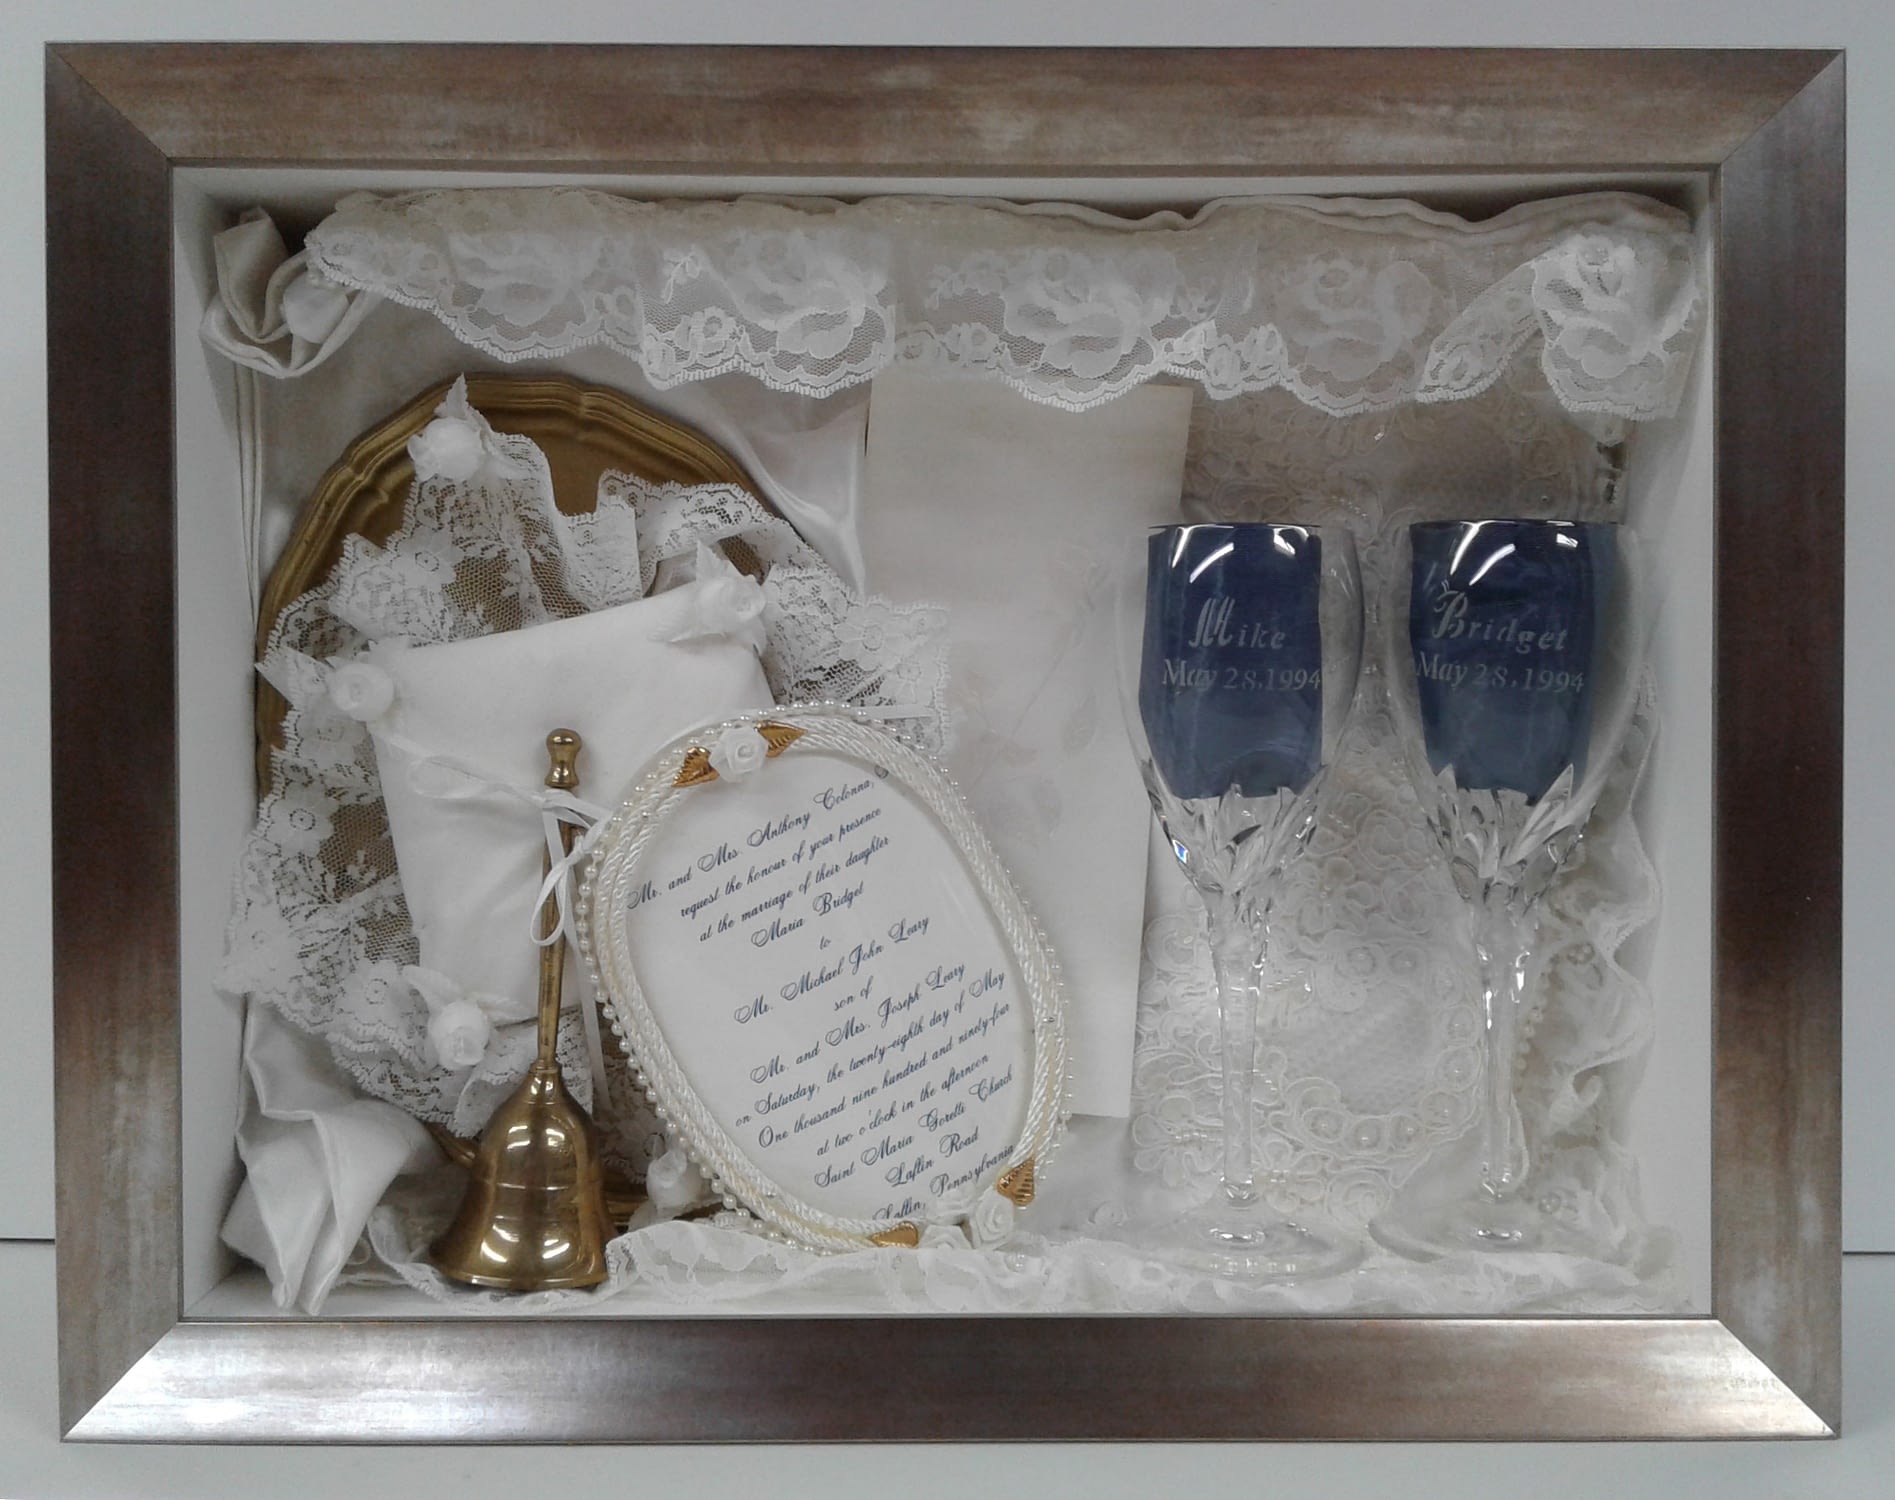 Wedding day memorabilia in a glass box with a wooden frame